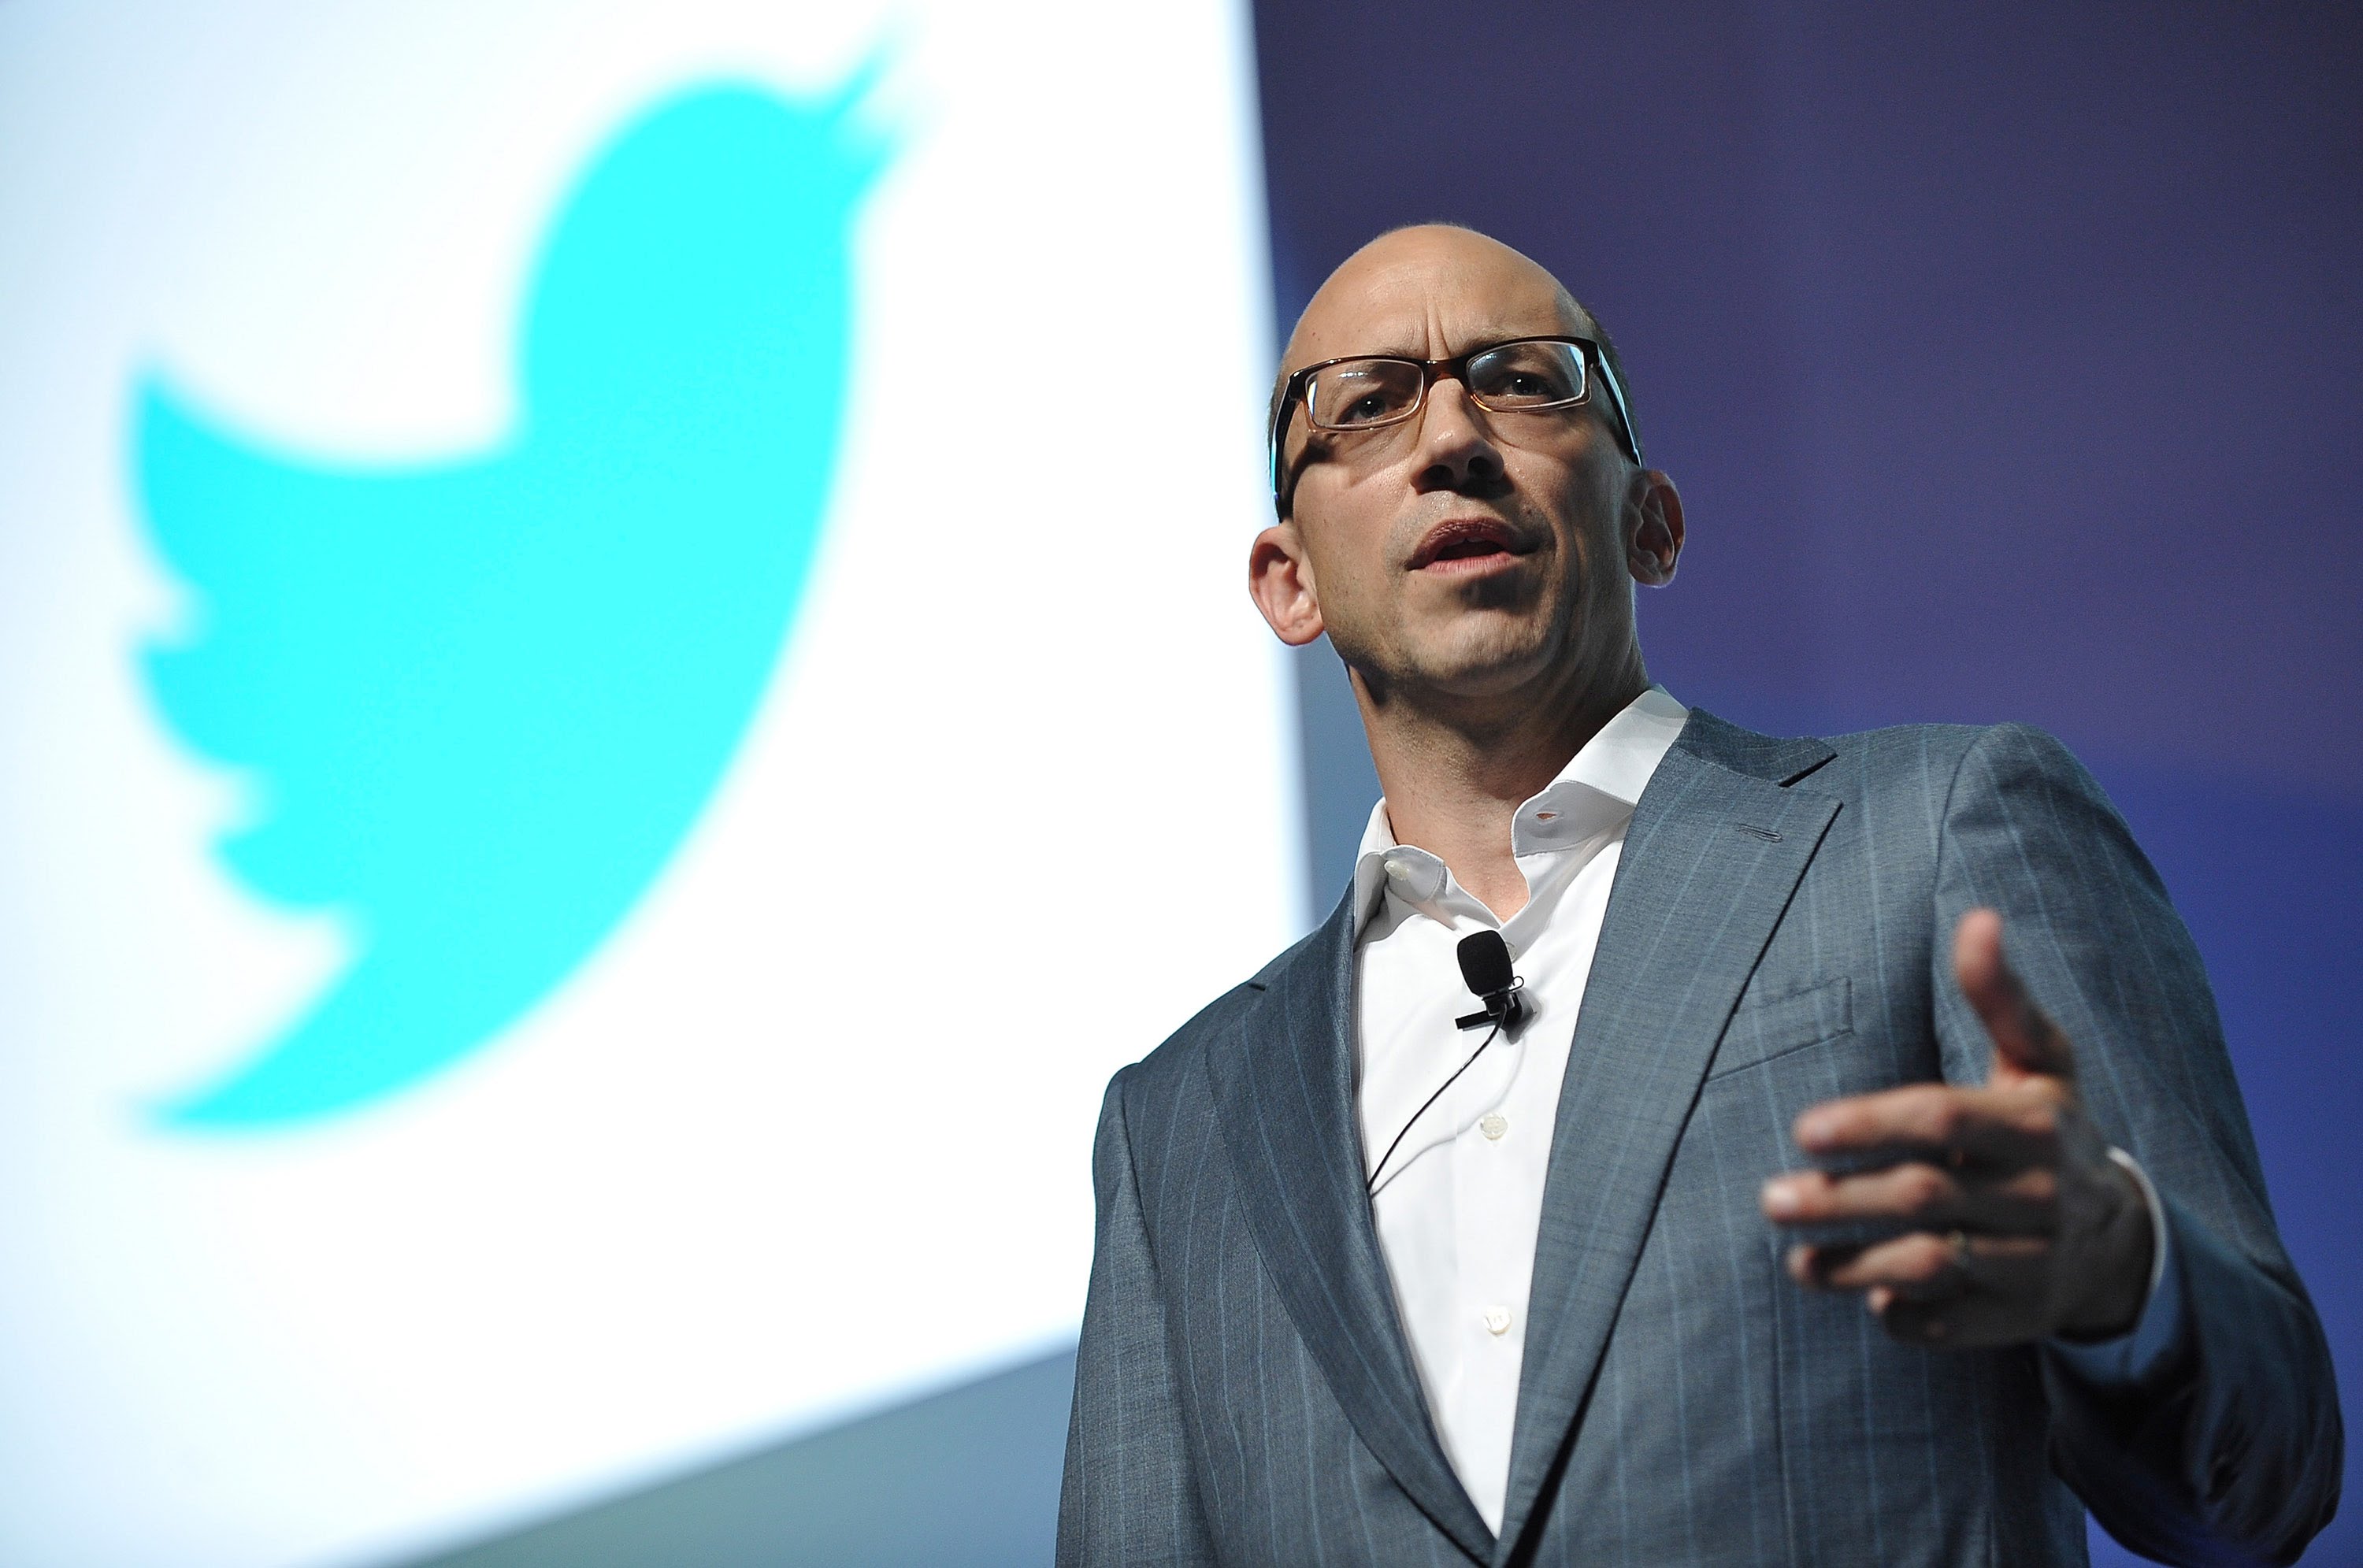 <p><strong>Dick Costolo on tech and thriving in an uncertain future</strong></p>